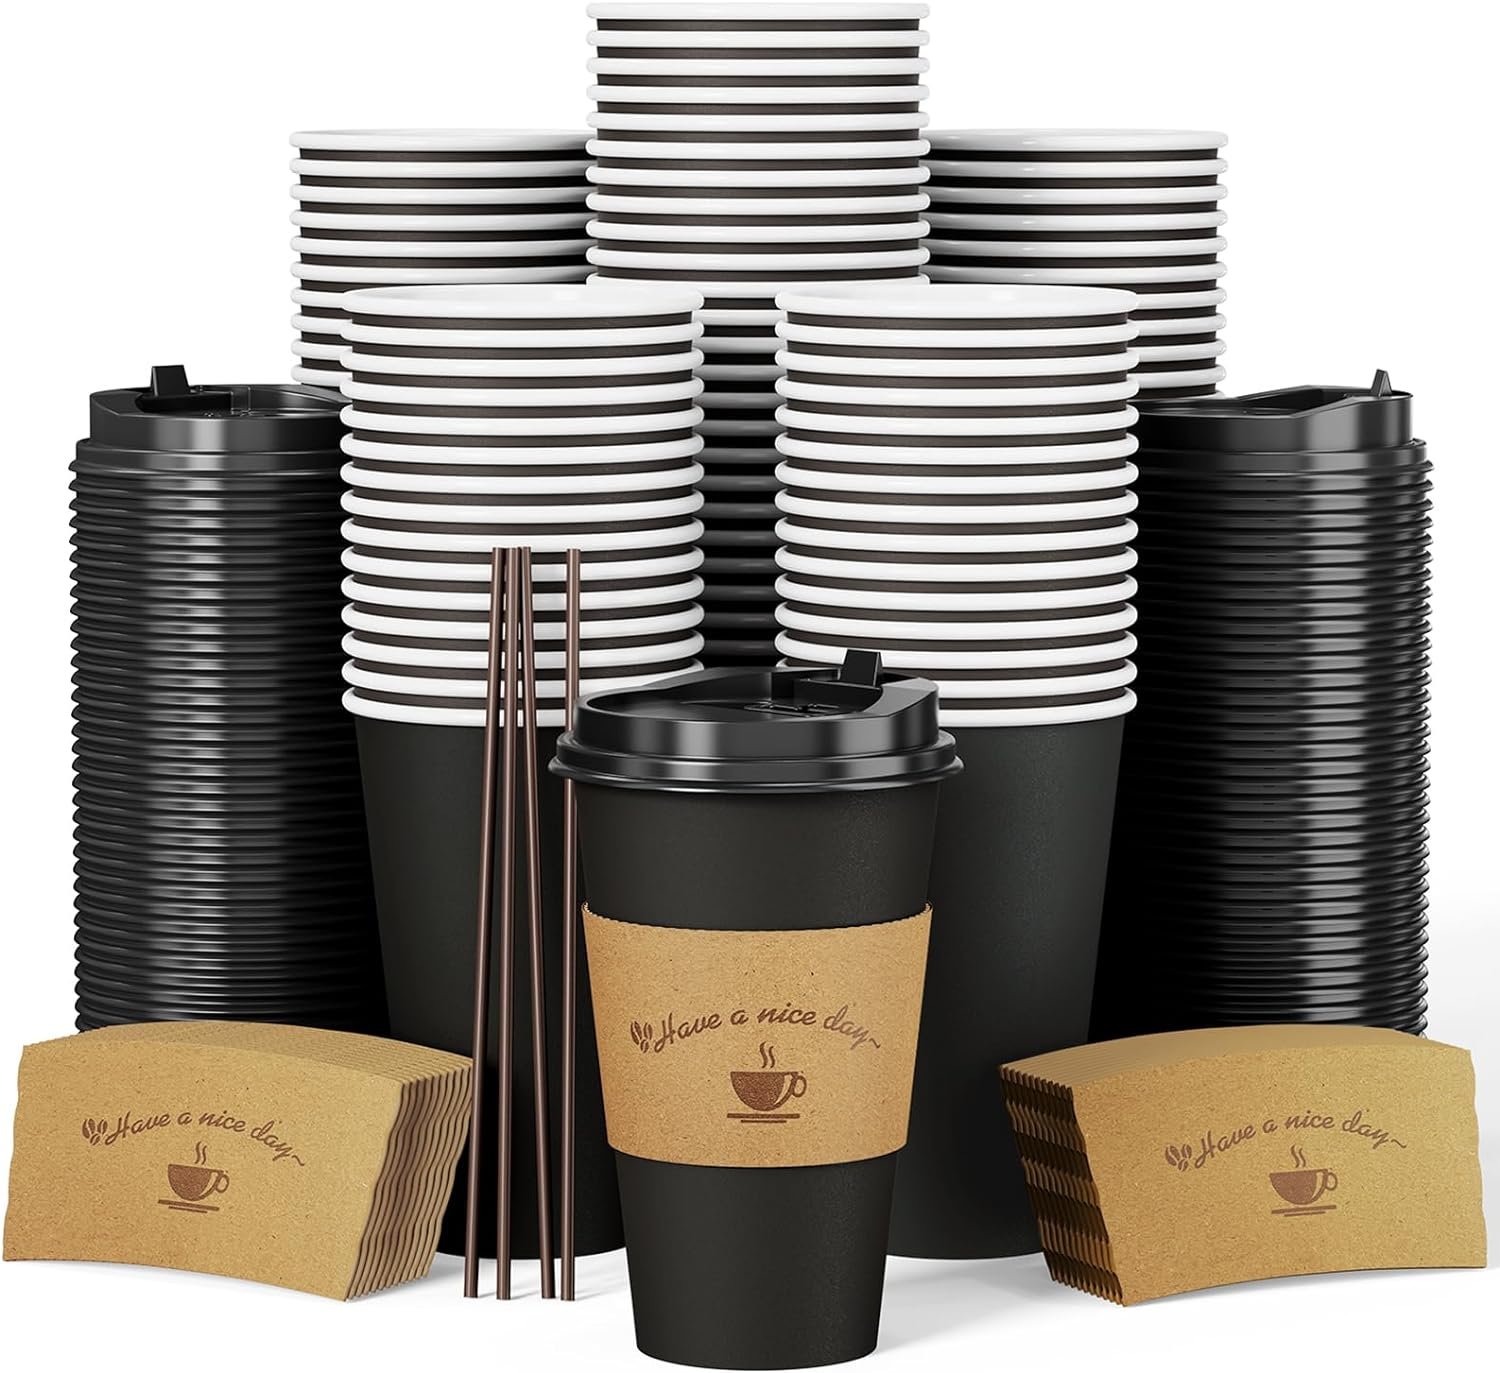 litopak 100 pack 16 oz paper coffee cups drinking cups for coldhot coffee chocolate drinks disposable coffee cups with l